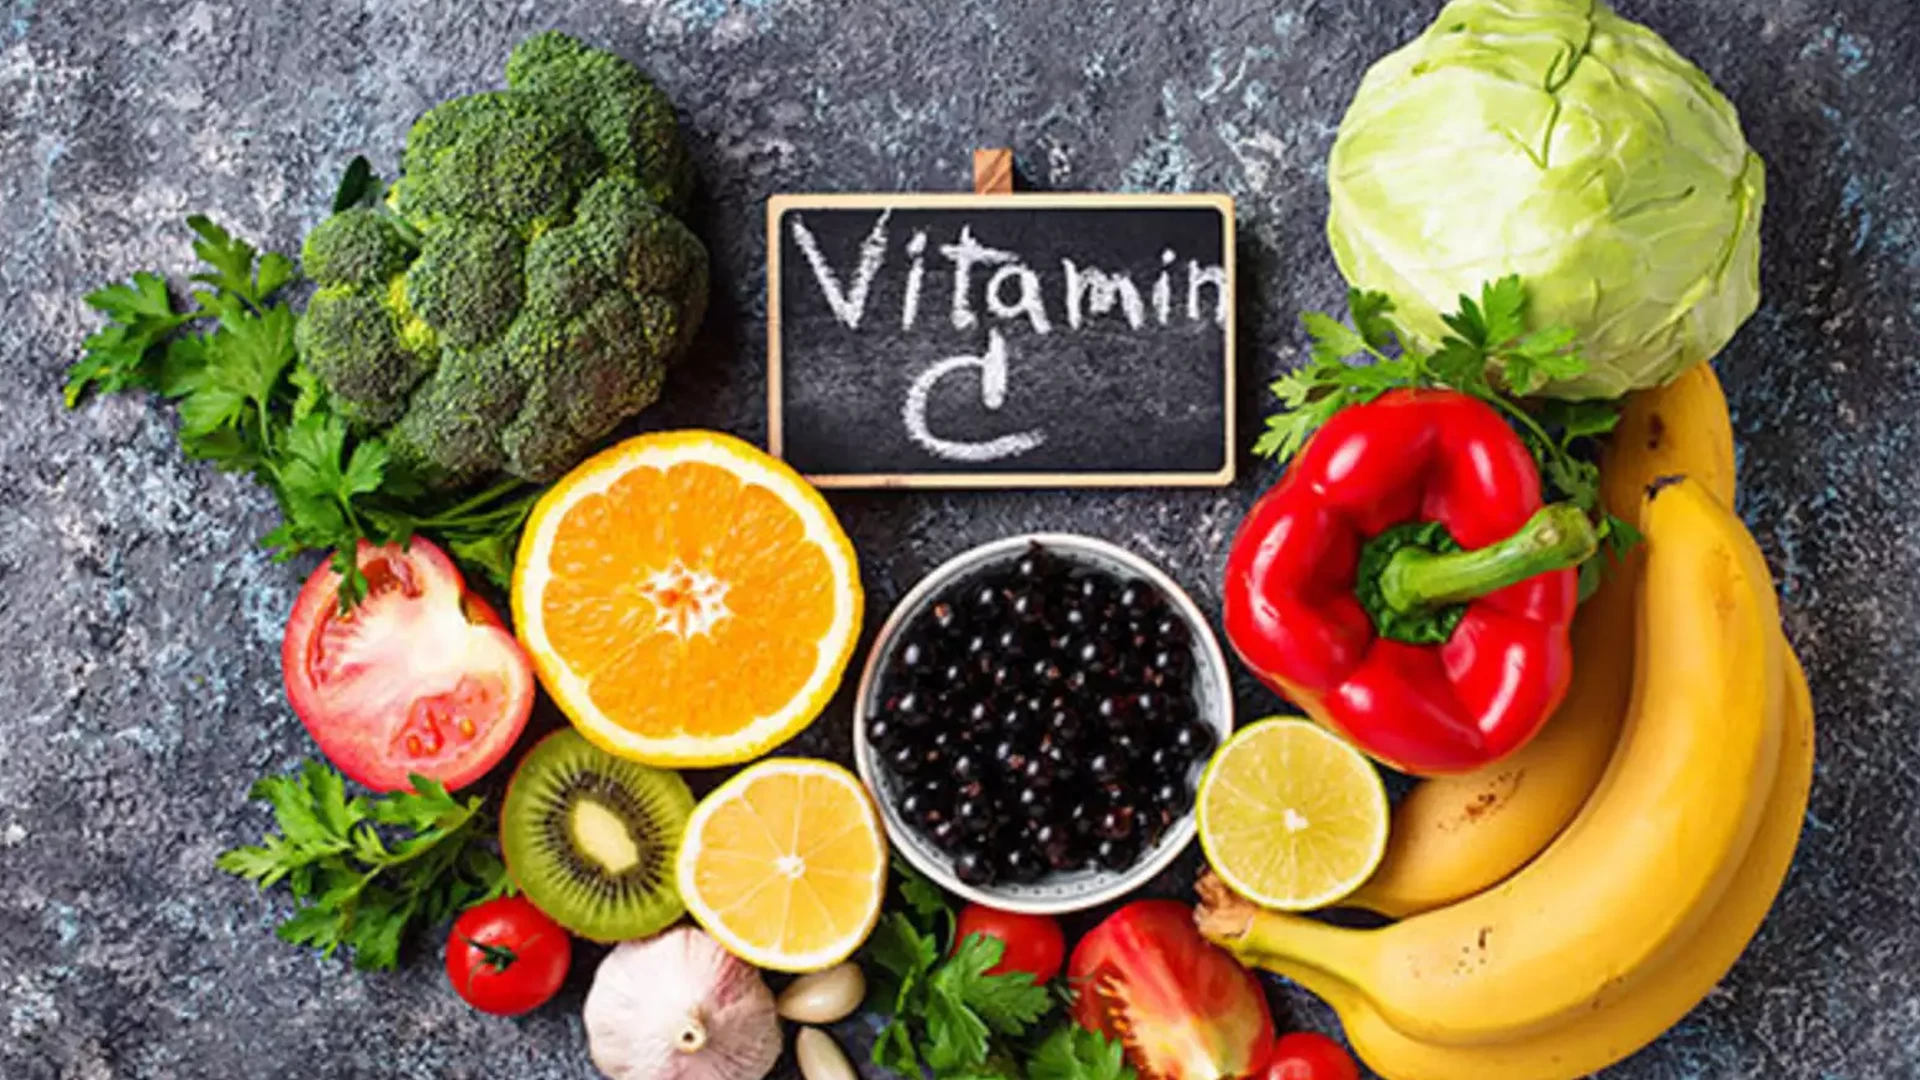 Foods Enriched With Vitamin C To Incorporate In Your Diet For A Healthy Body